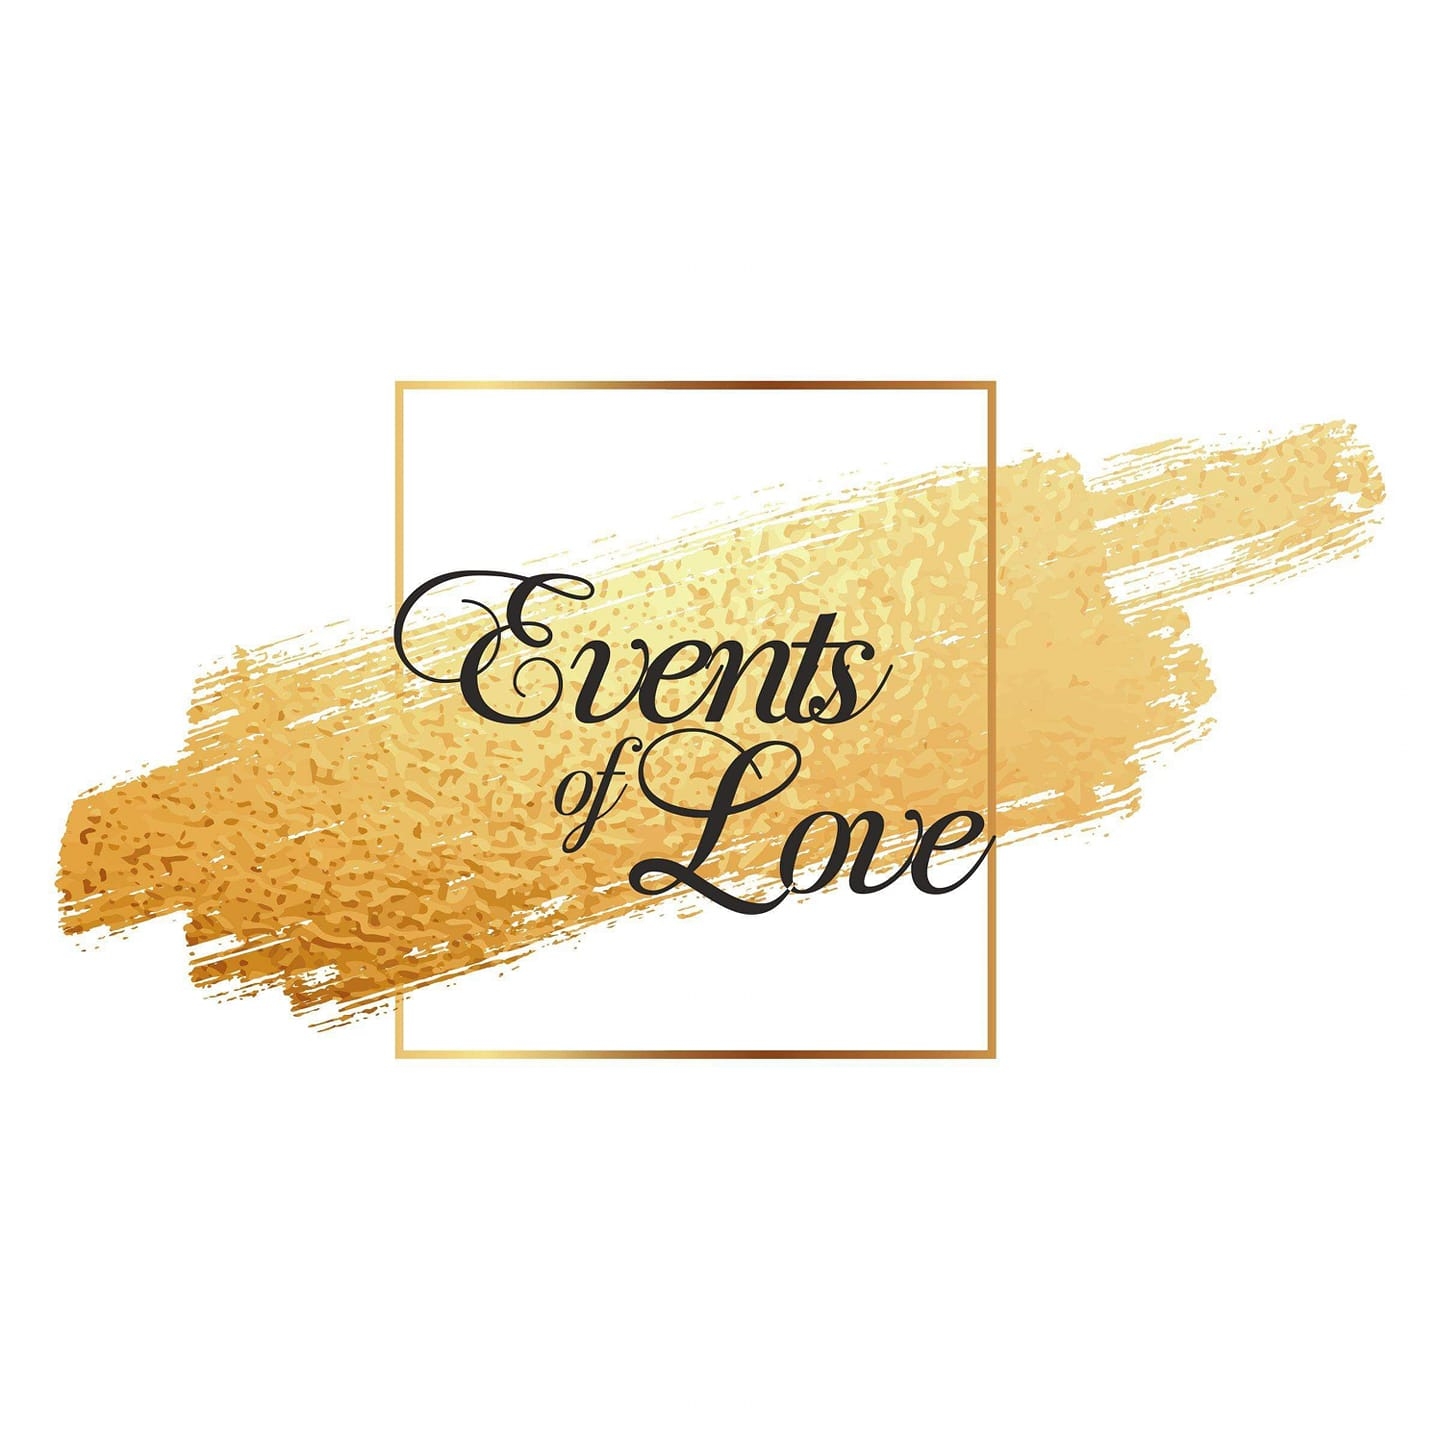 "Events of Love"